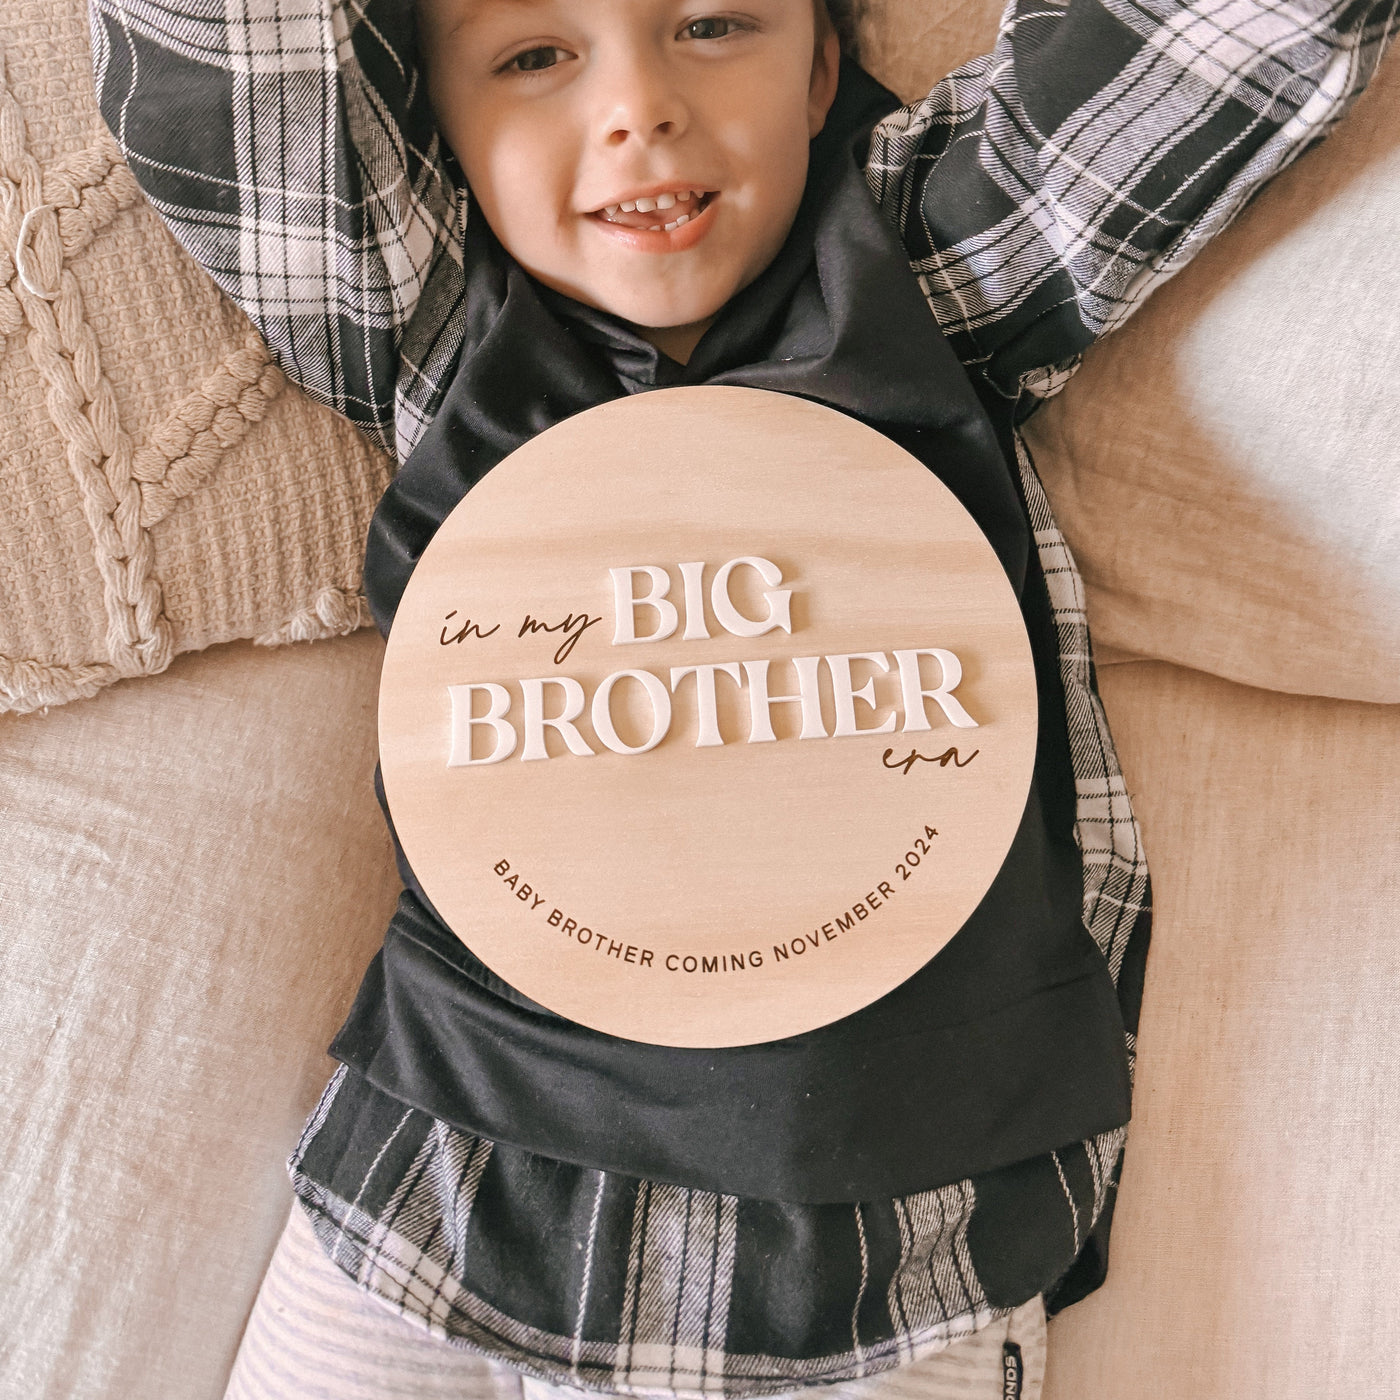 Adorable child holding wooden big brother announcement